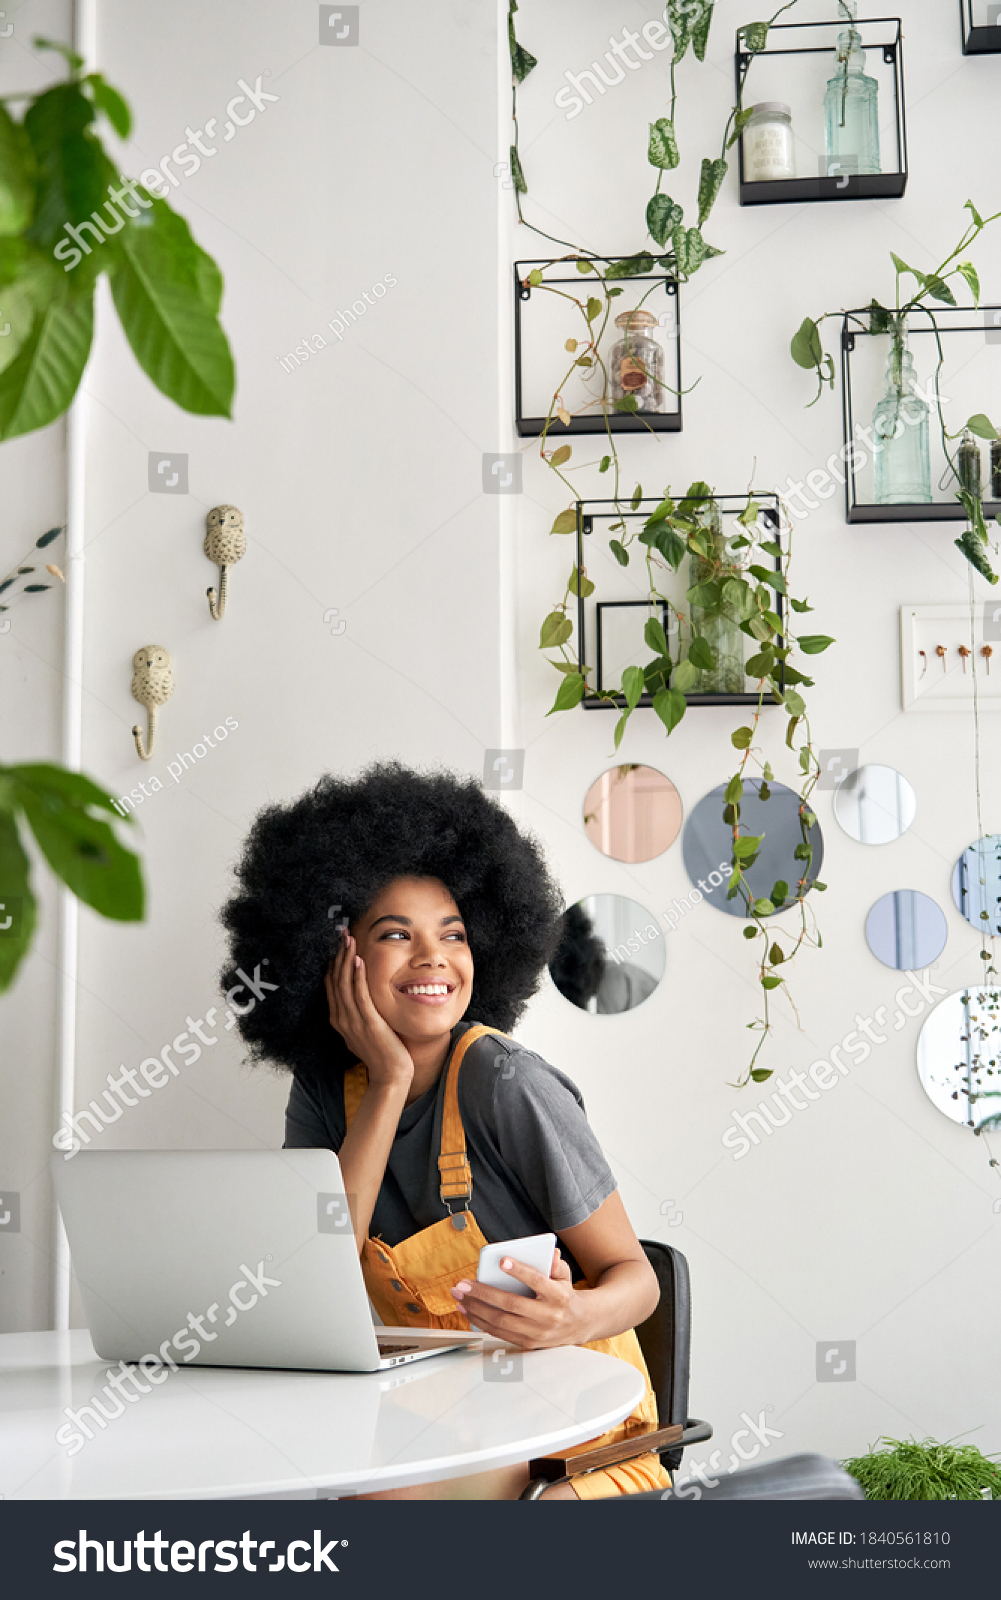 Young happy stylish African American gen z hipster teenage girl student with Afro hair laughing, looking through window, sitting at table in modern cozy cafe interior, holding phone, using laptop. #1840561810